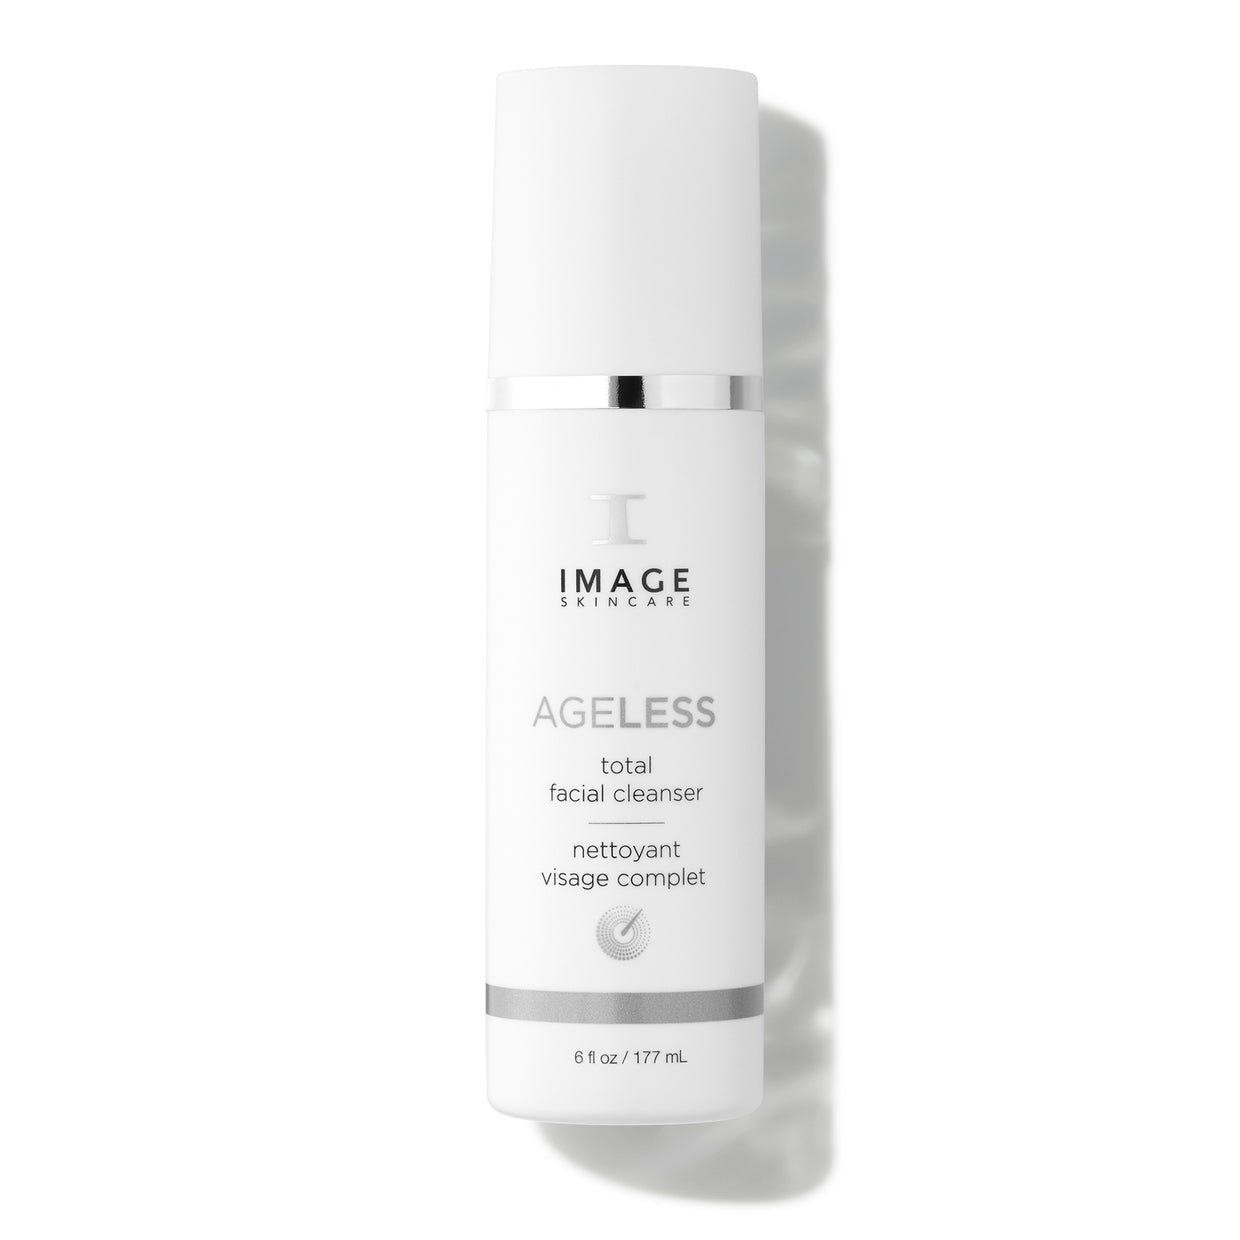 Image Skincare Ageless Total Facial Cleanser Shop At Exclusive Beauty